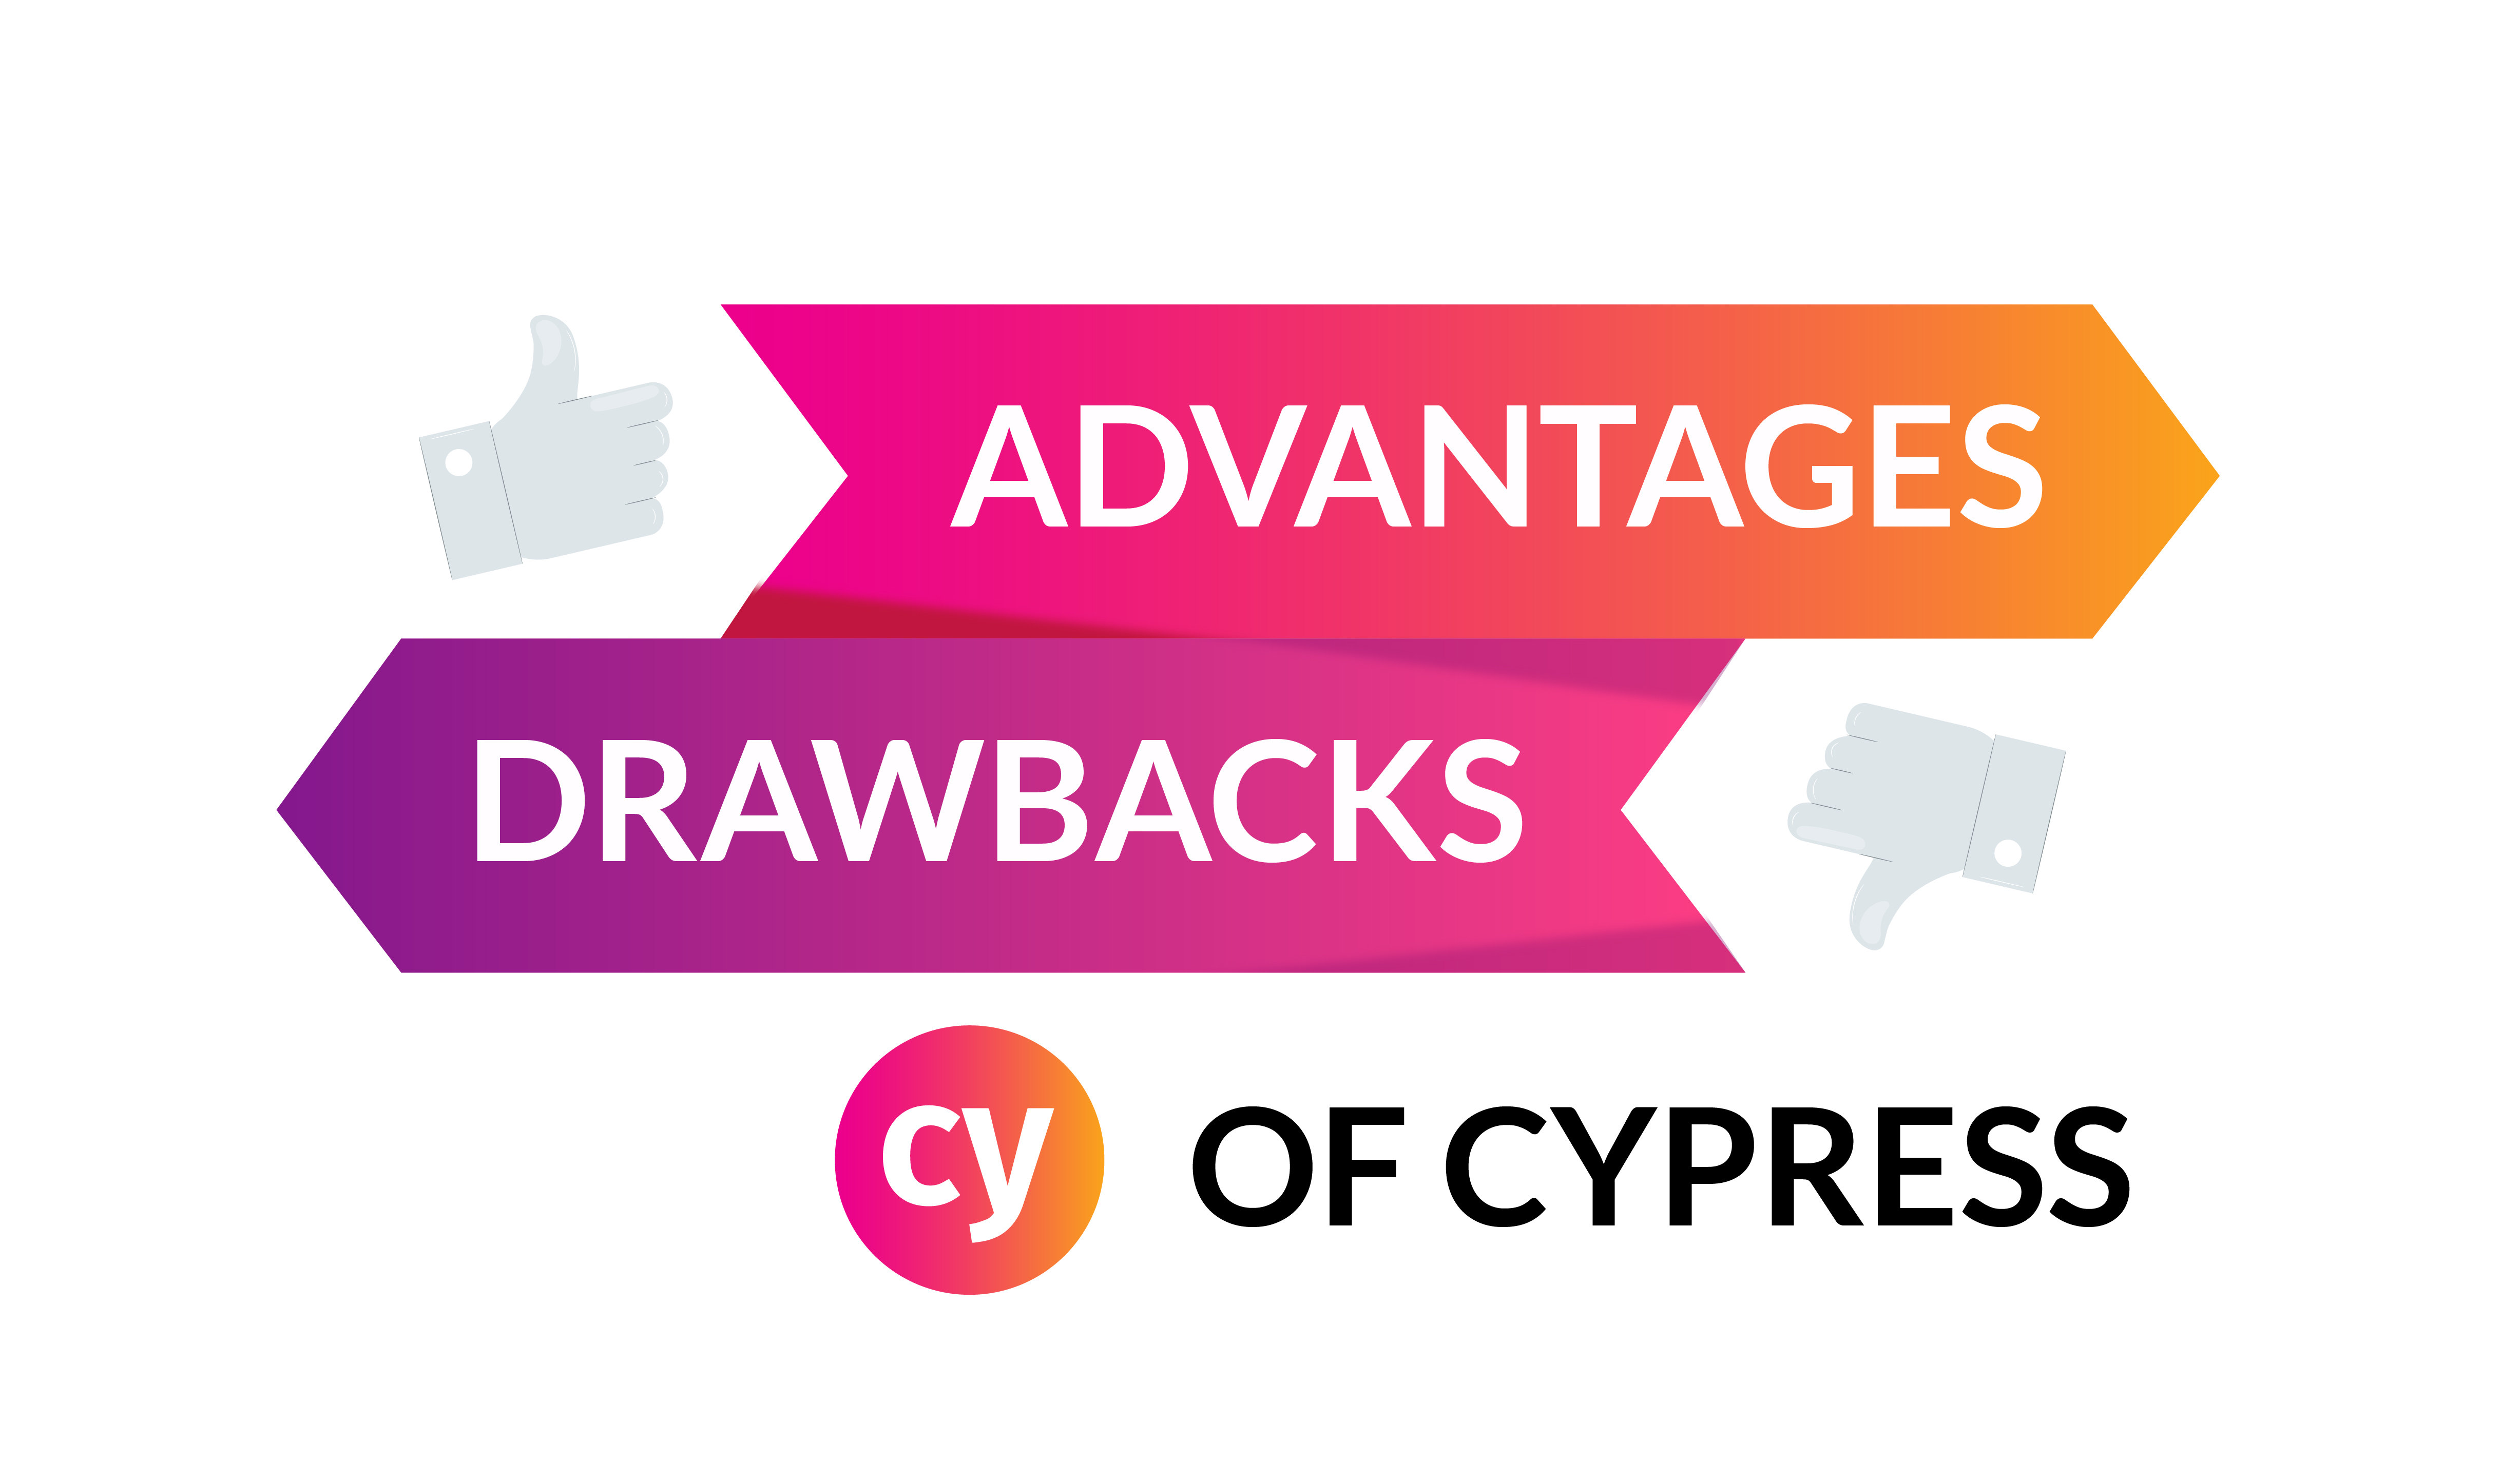 The Advantages and Drawbacks of Cypress